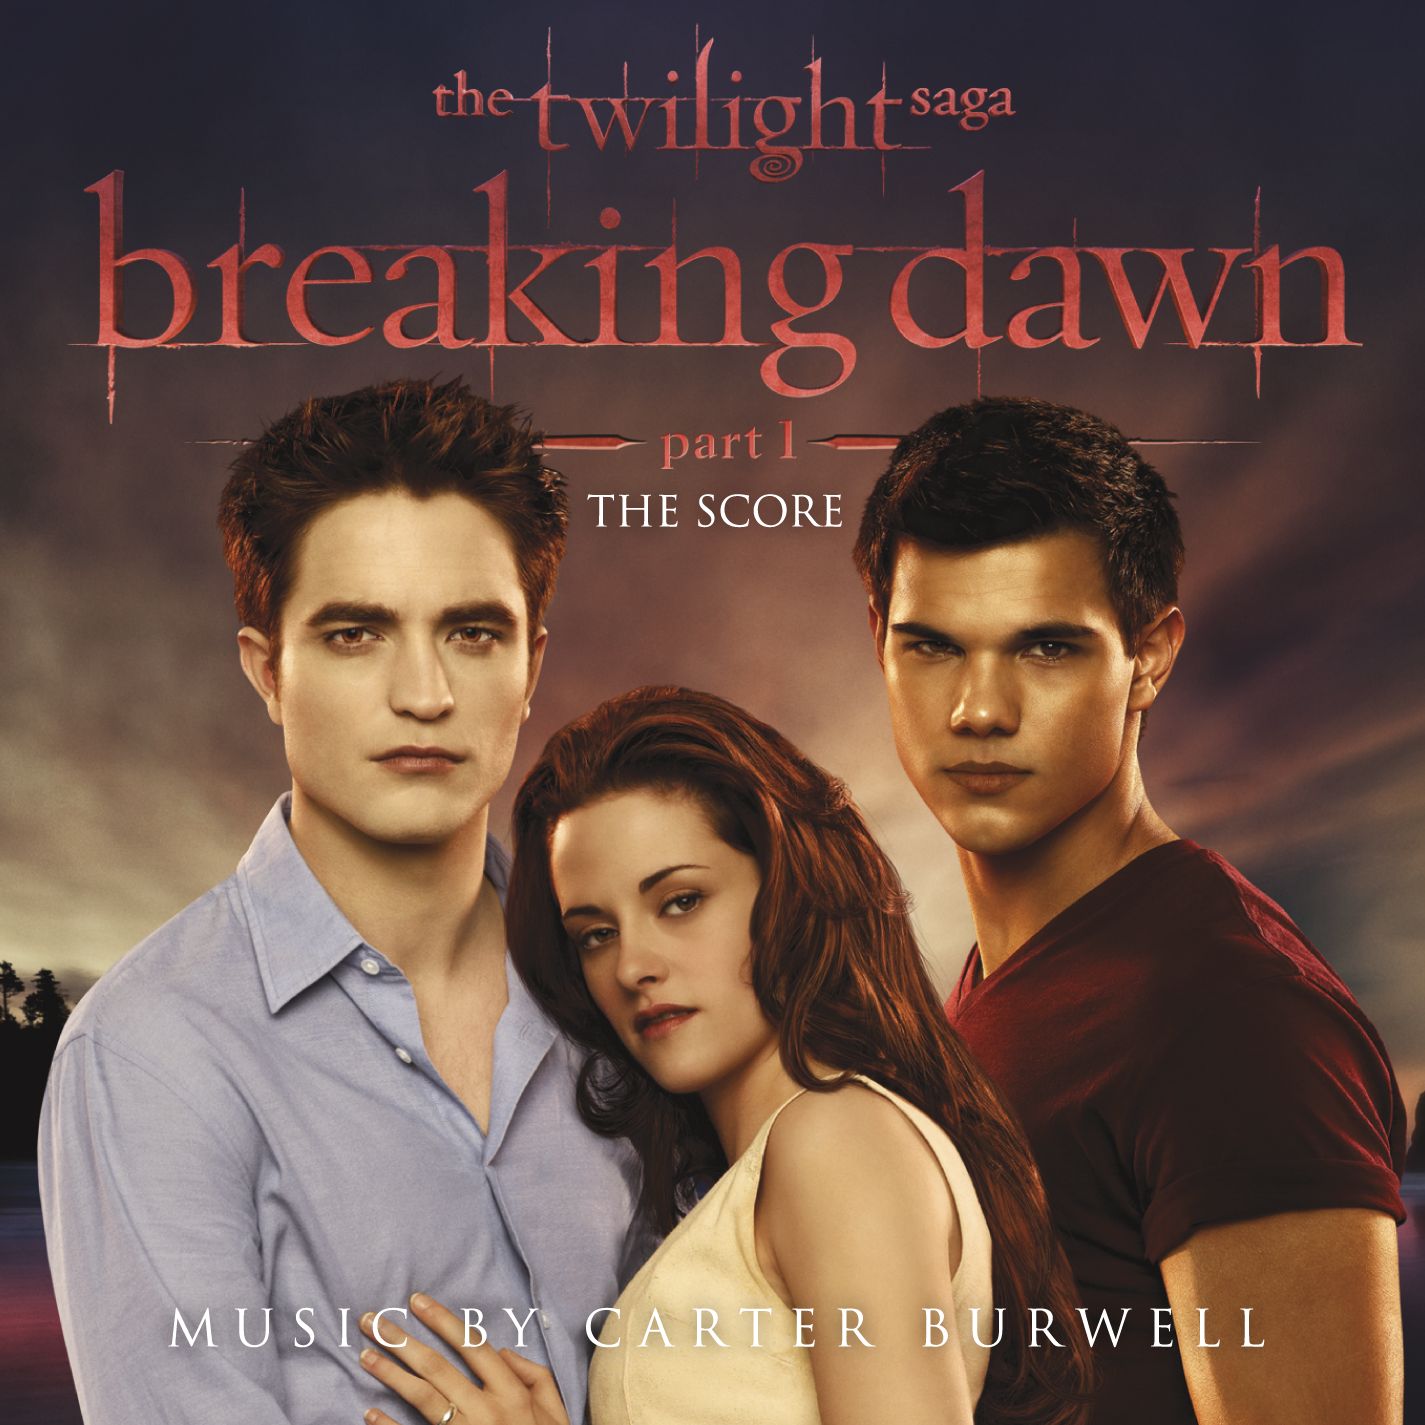 The Twilight Saga: Breaking Dawn - Part 1 (The Score Music By Carter Burwell )